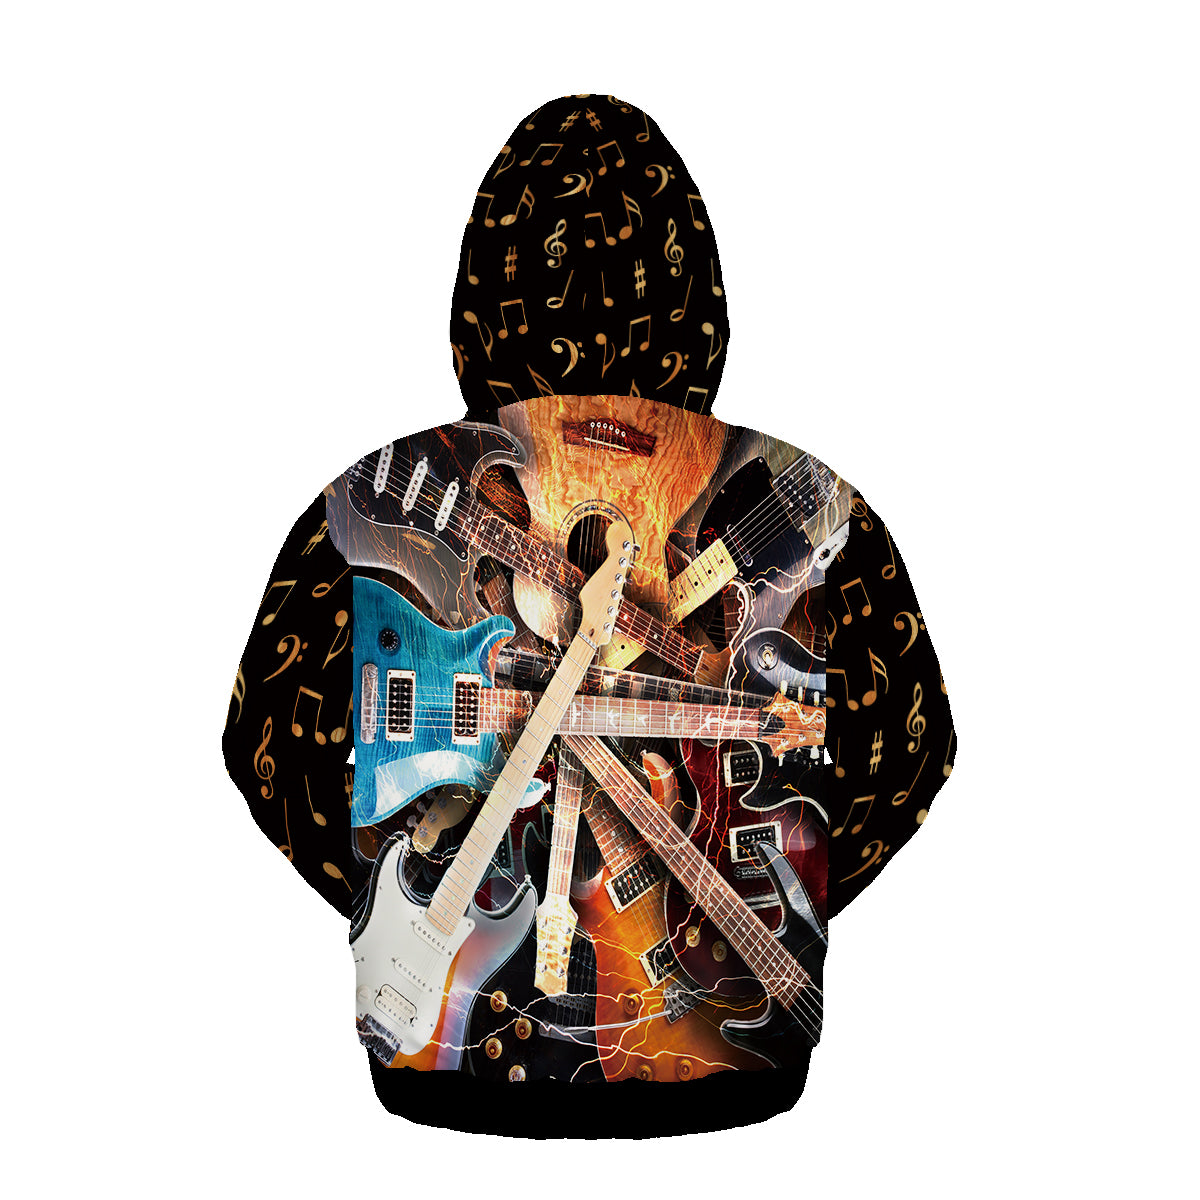 Free Shipping Unique Hoodies Pullover 3d Guitar Printed Sweatshirts